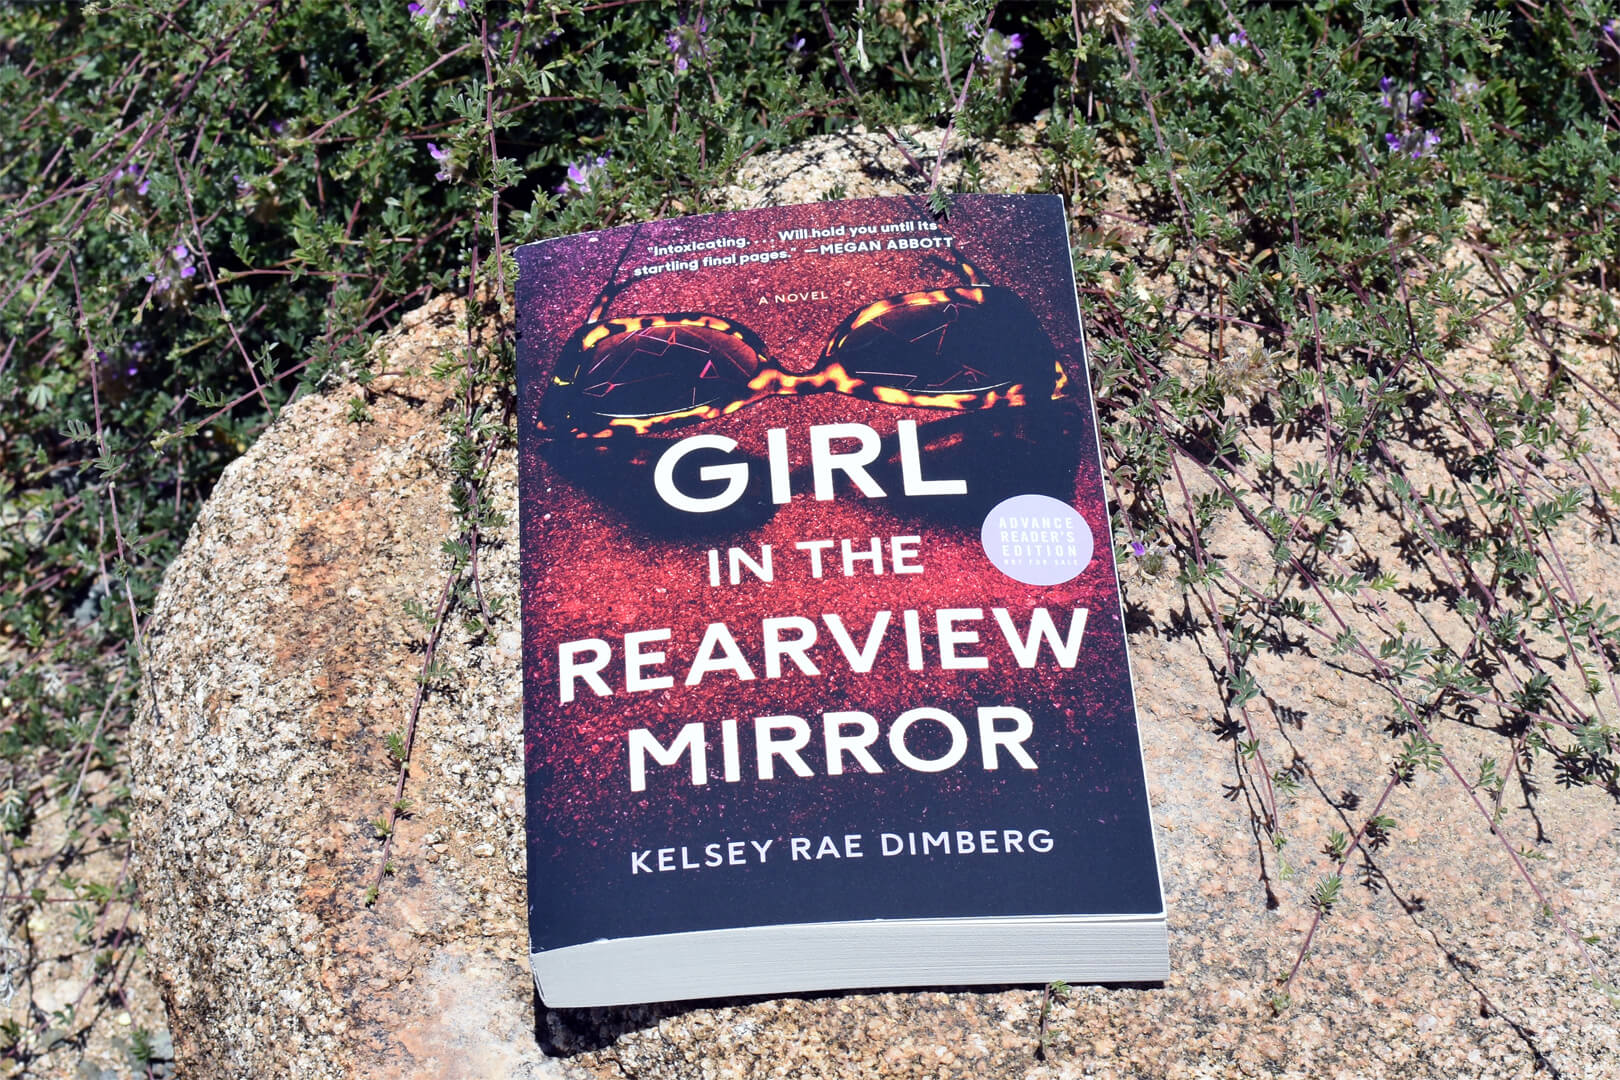 Book Club Questions for Girl in the Rearview Mirror by Kelsey Rae Dimberg